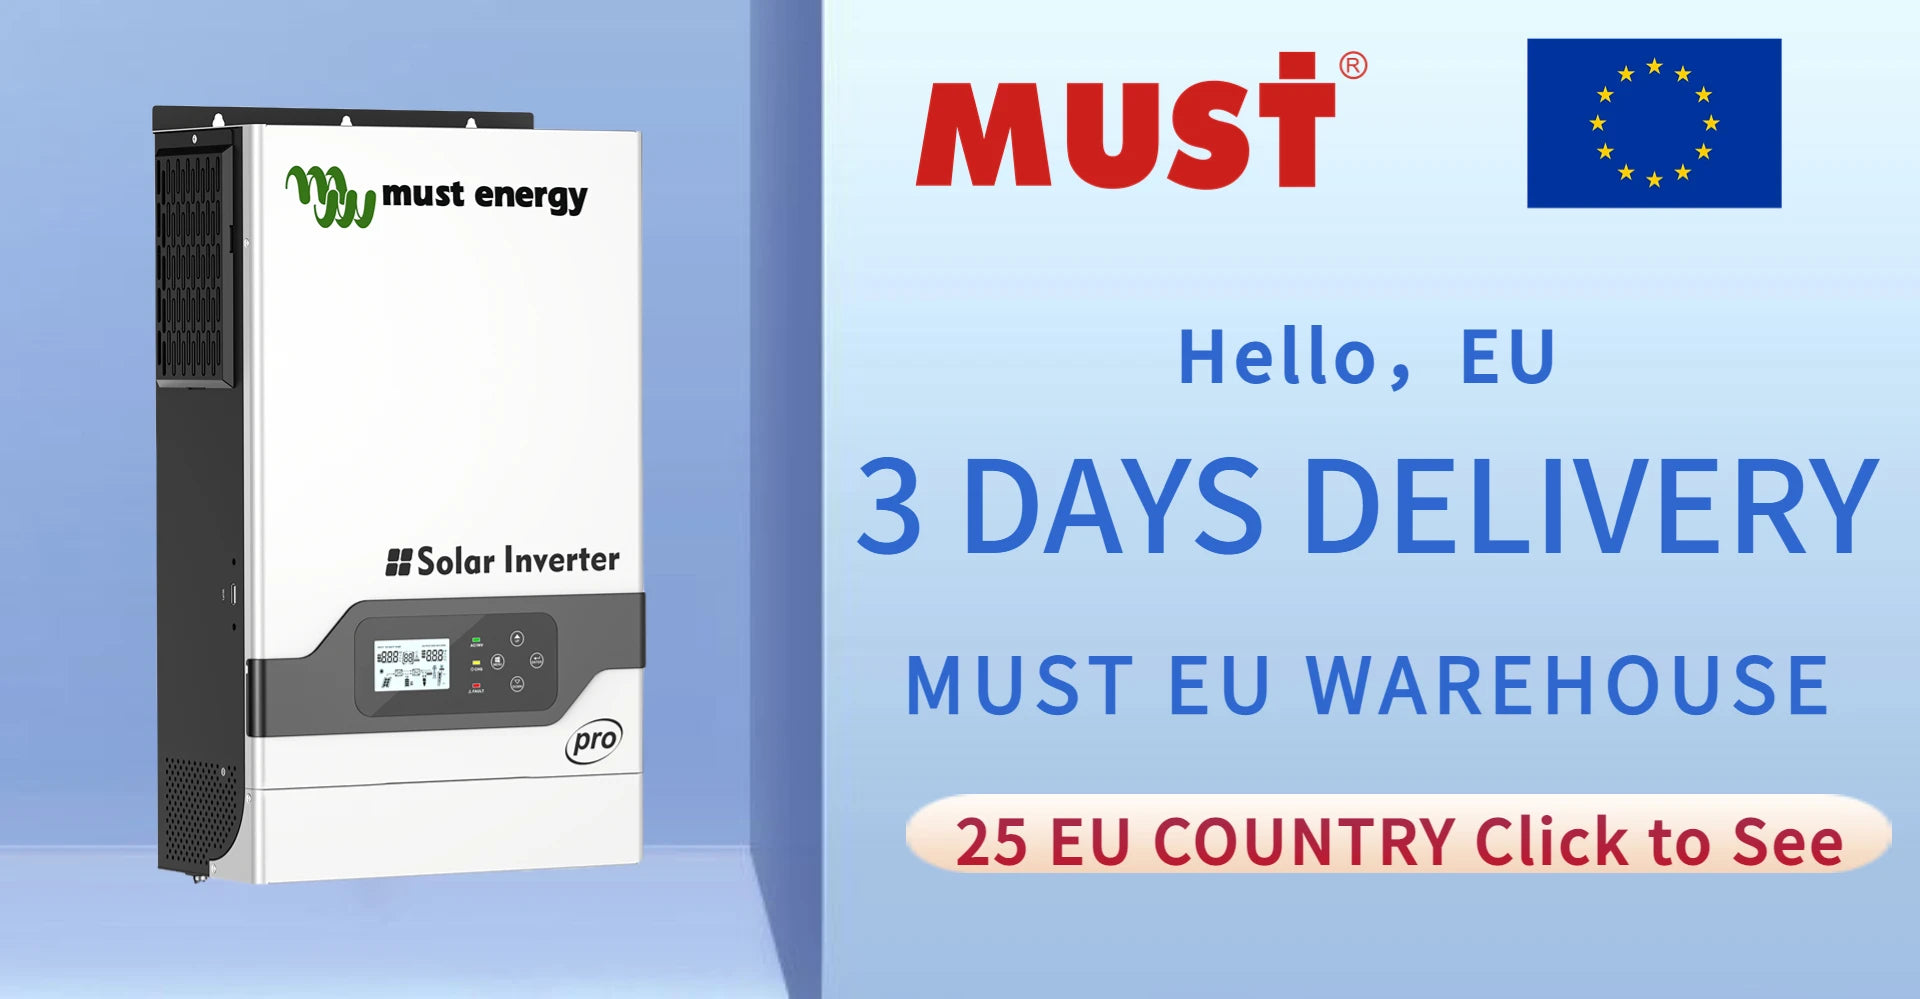 Must Energy's PV18 hybrid solar inverter with WiFi connectivity and fast EU delivery.